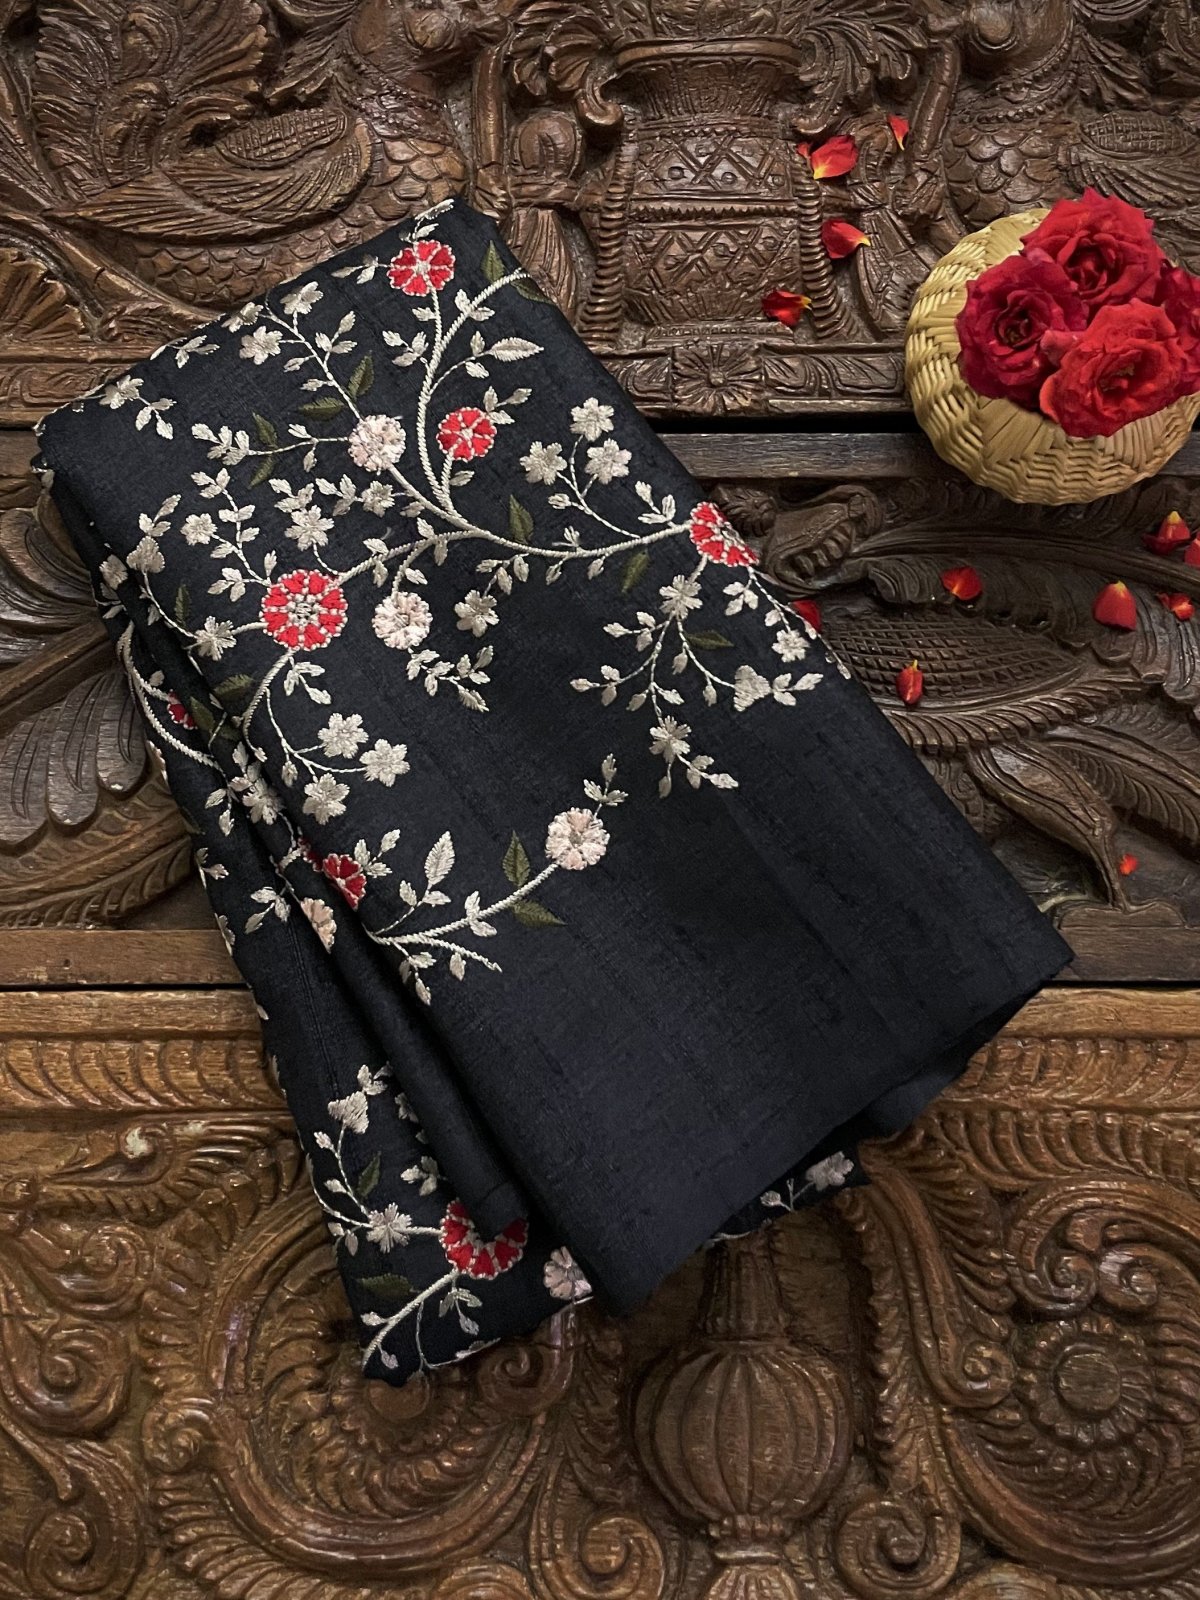 Black Tussar Silk Blouse With Floral Embroidery